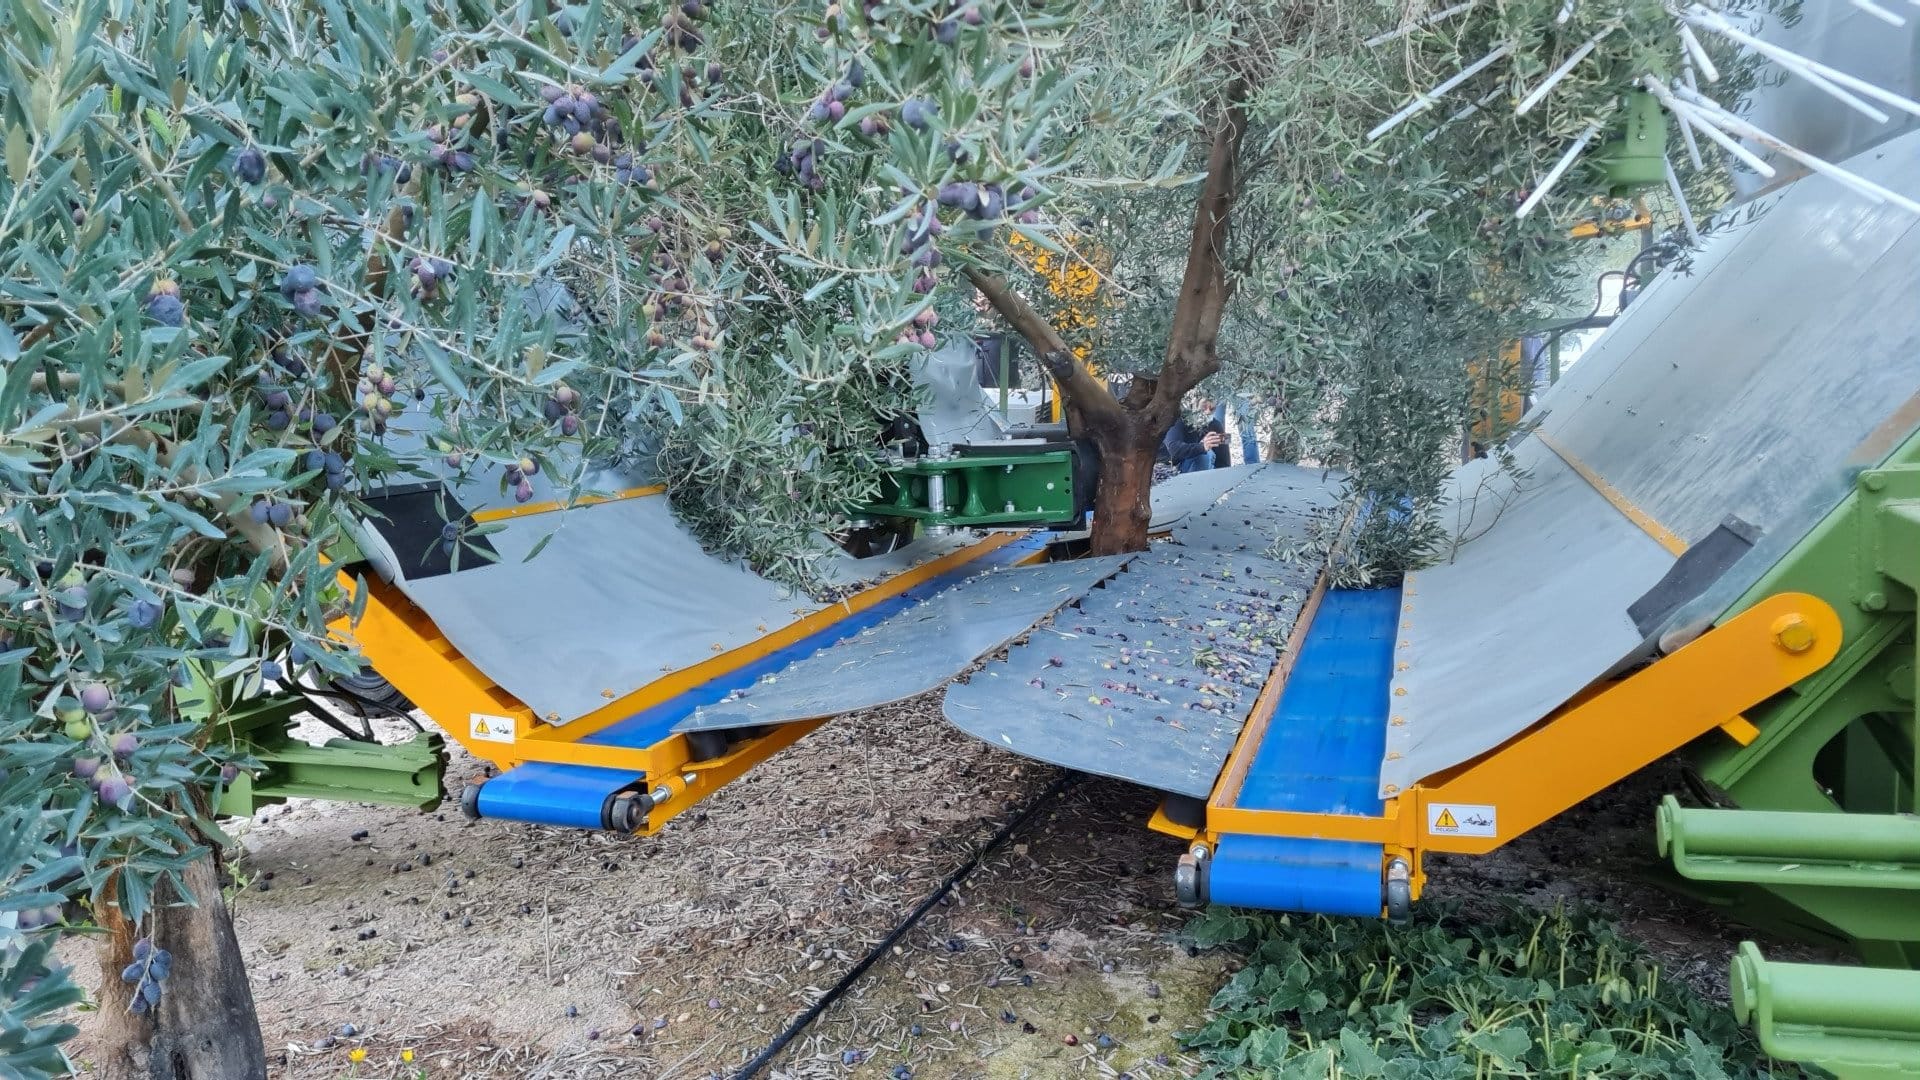 business-europe-production-researchers-unveil-the-latest-technologies-to-help-harvest-and-produce-olive-oil-olive-oil-times